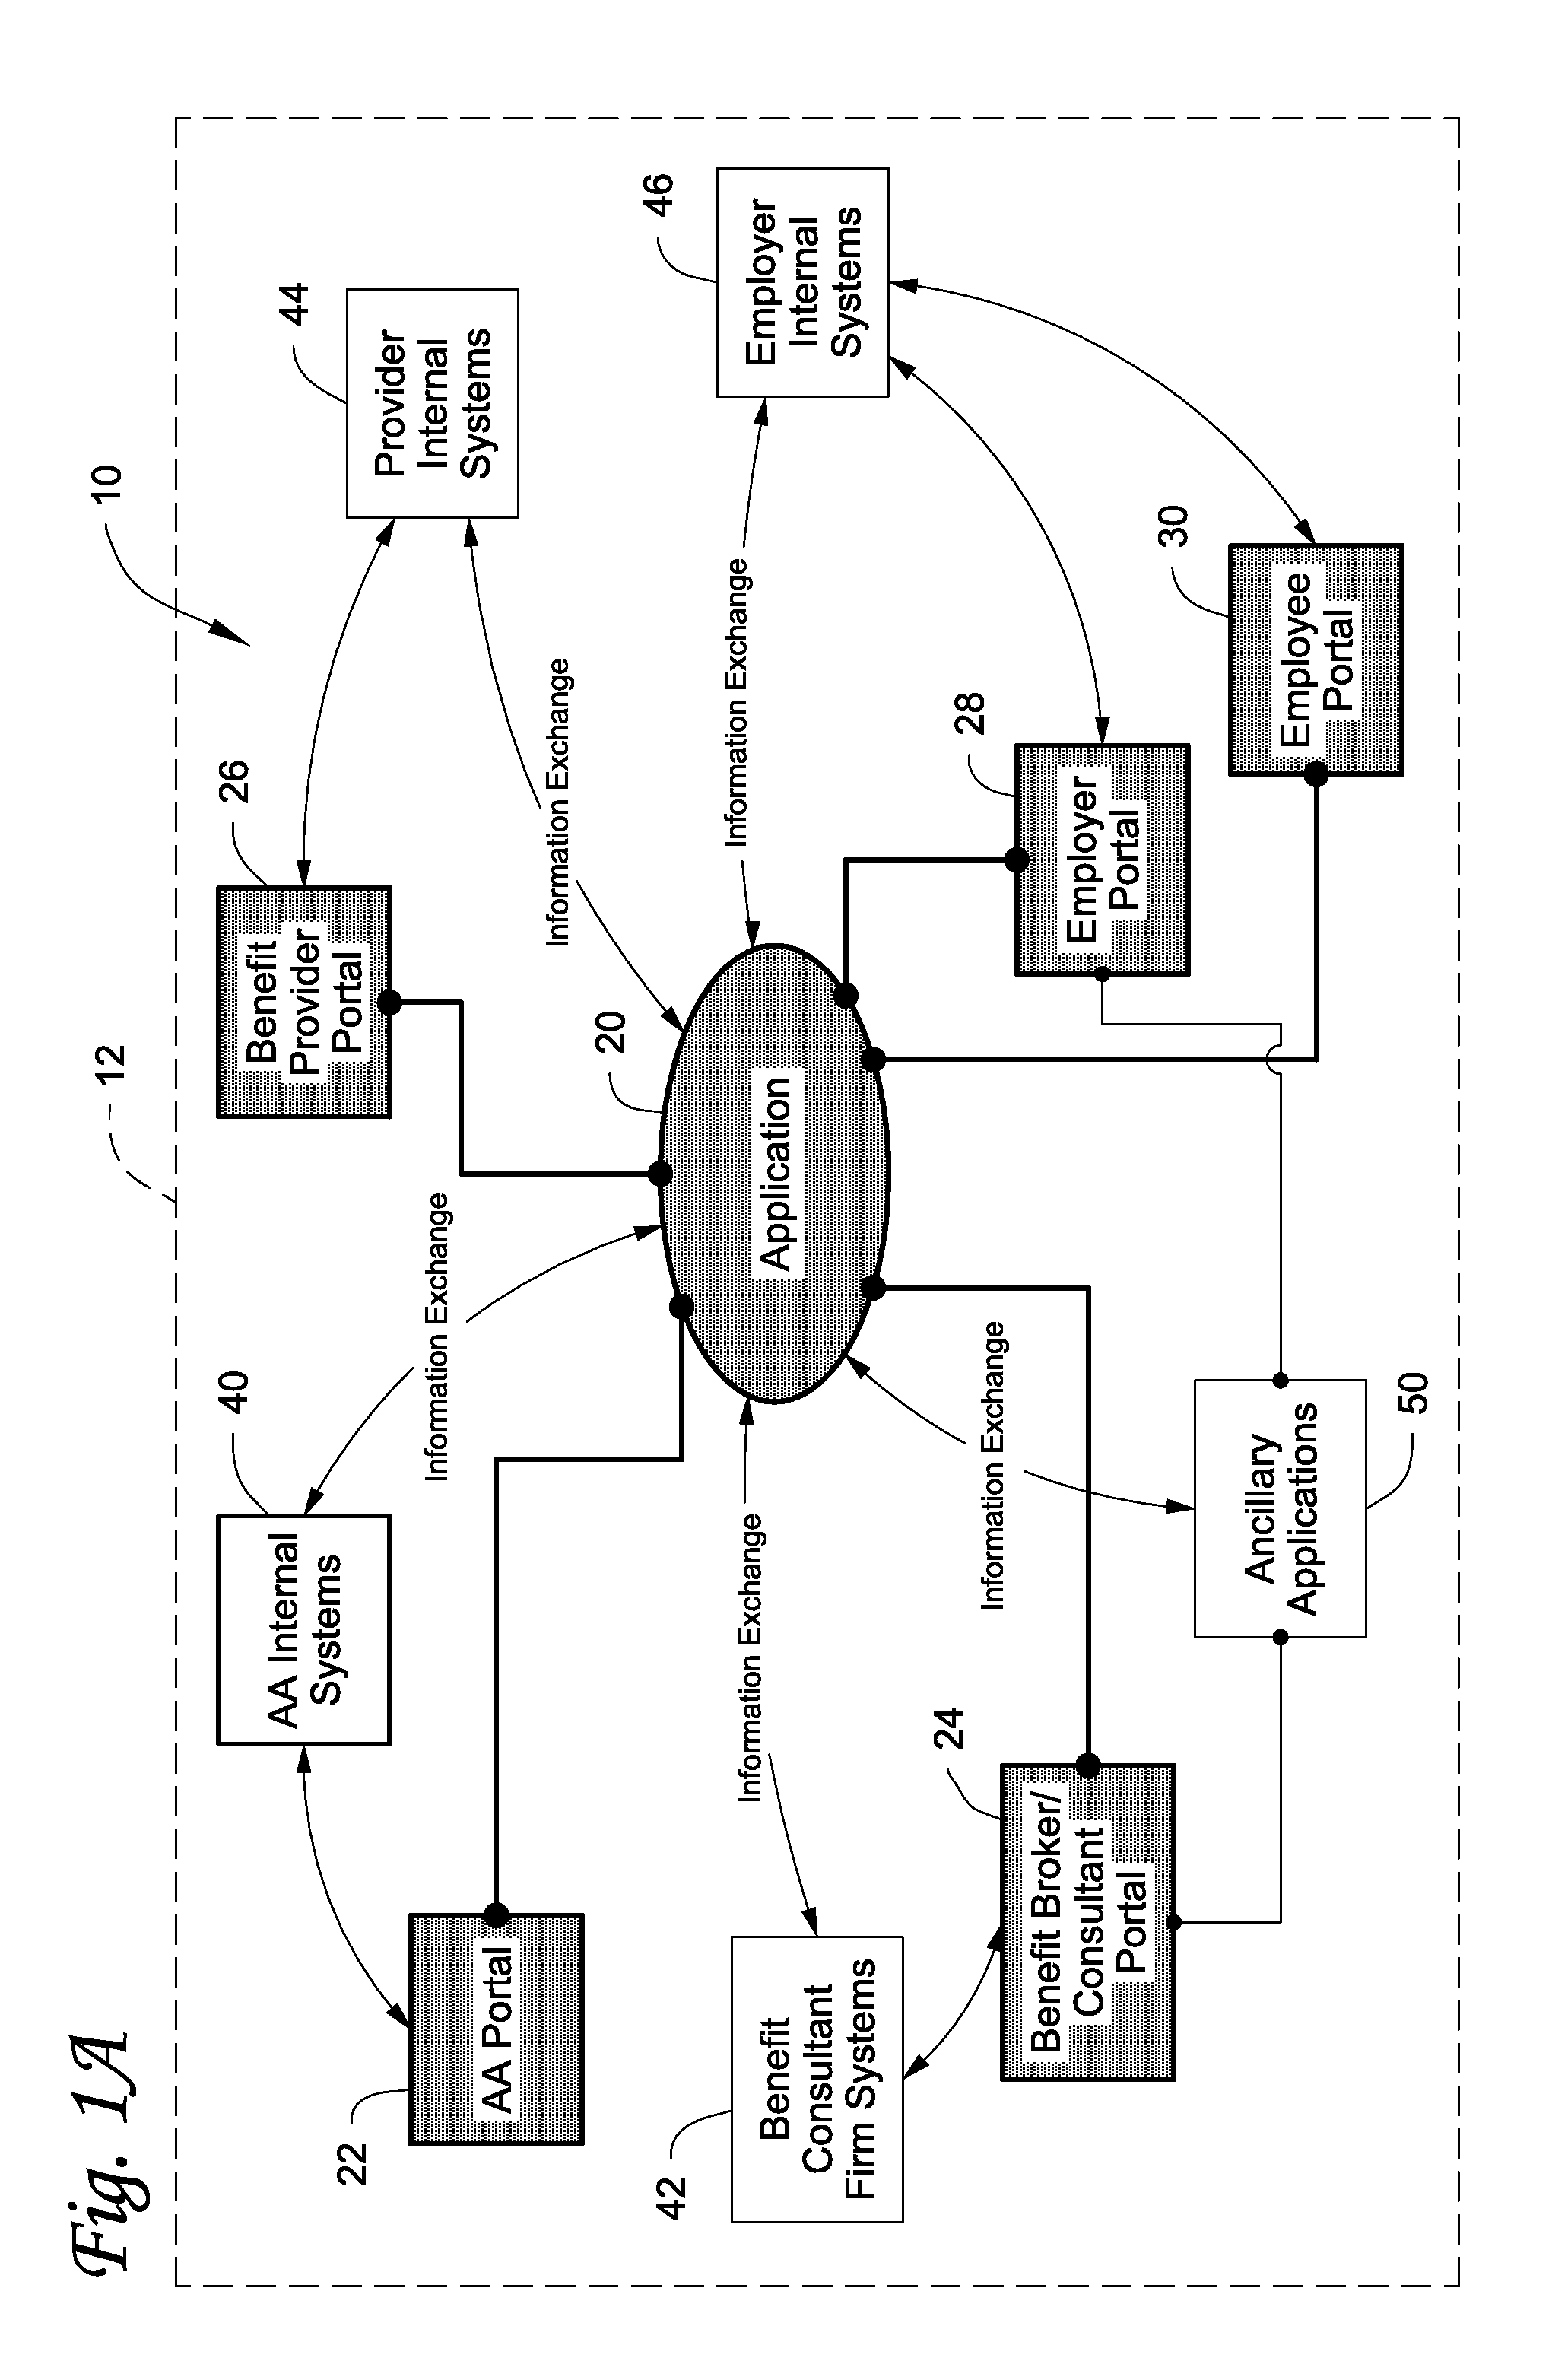 Benefit management system and method